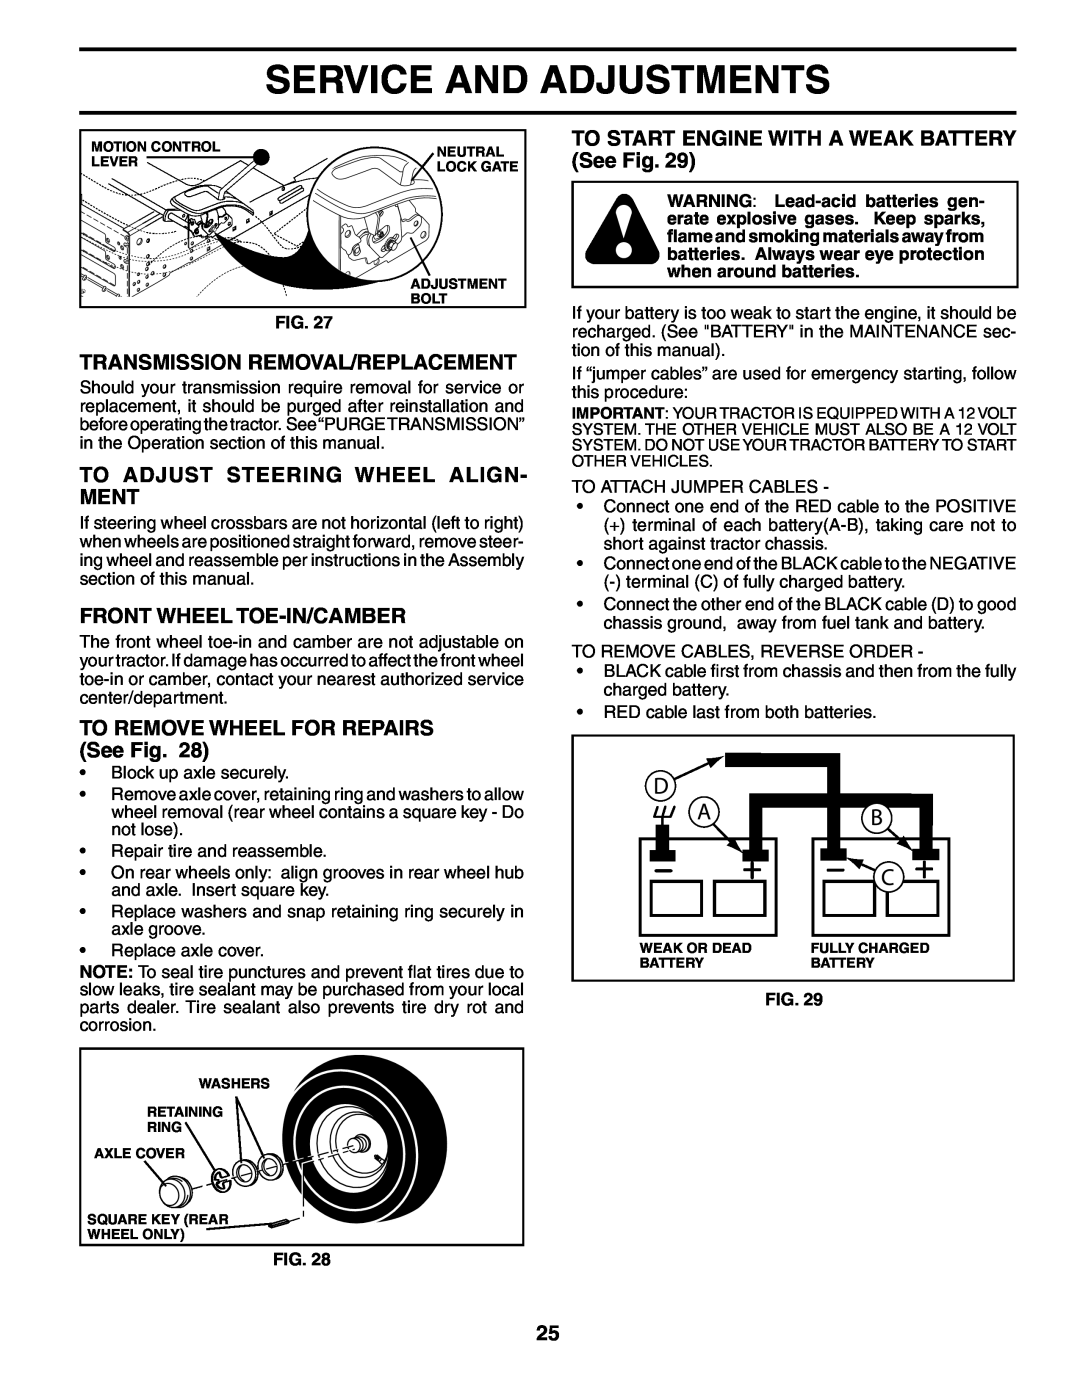 Poulan 195854 manual Transmission Removal/Replacement, To Adjust Steering Wheel Align- Ment, Front Wheel Toe-In/Camber 